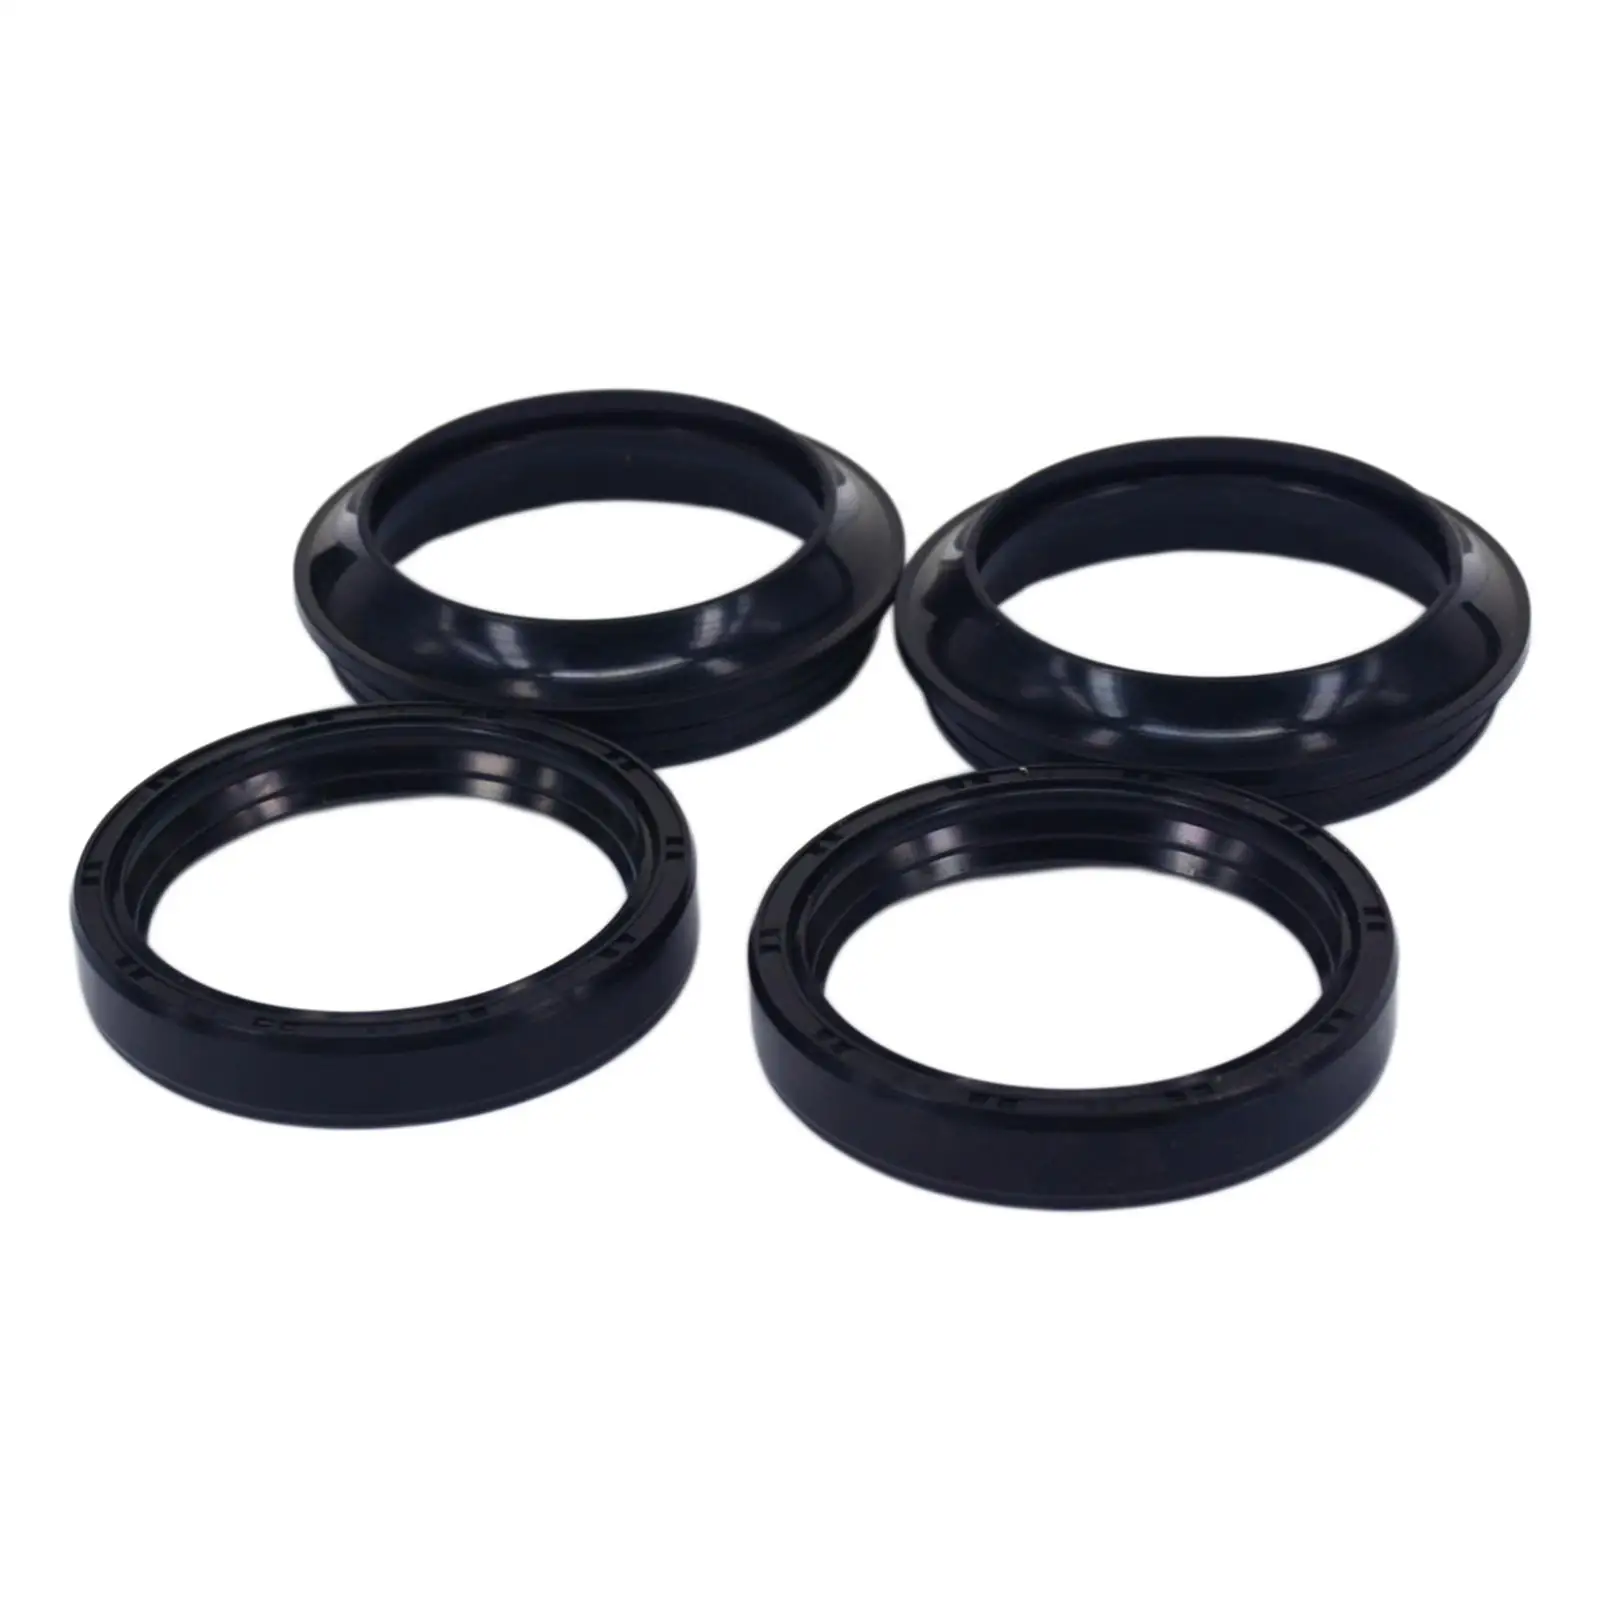 Motorcycle Front Shock Absorber Oil Seals Set Replacement Repair Parts for Honda